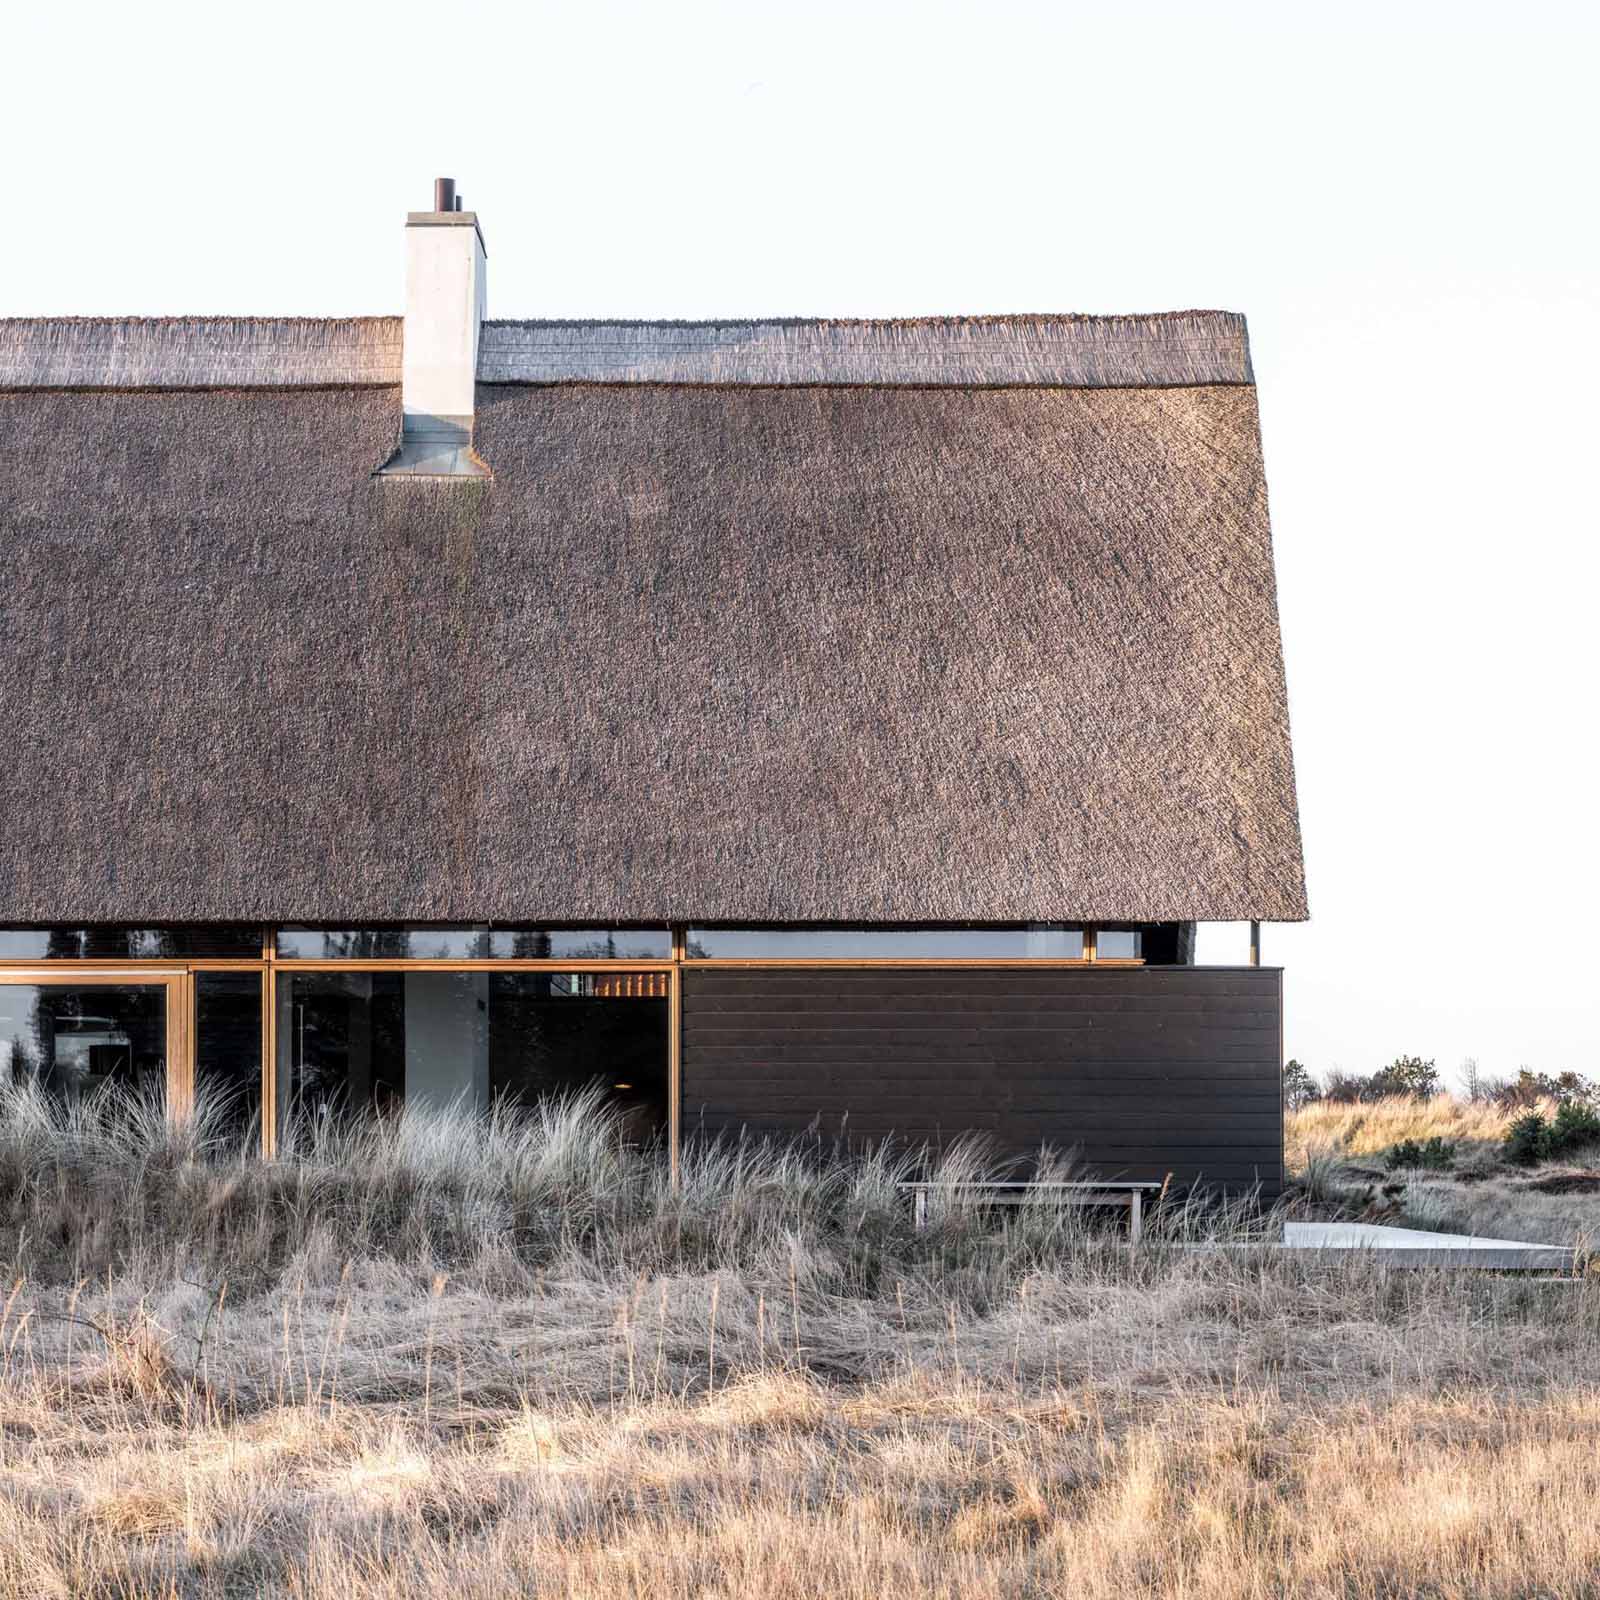 A modern home with black charred wood siding and a thatched roof.